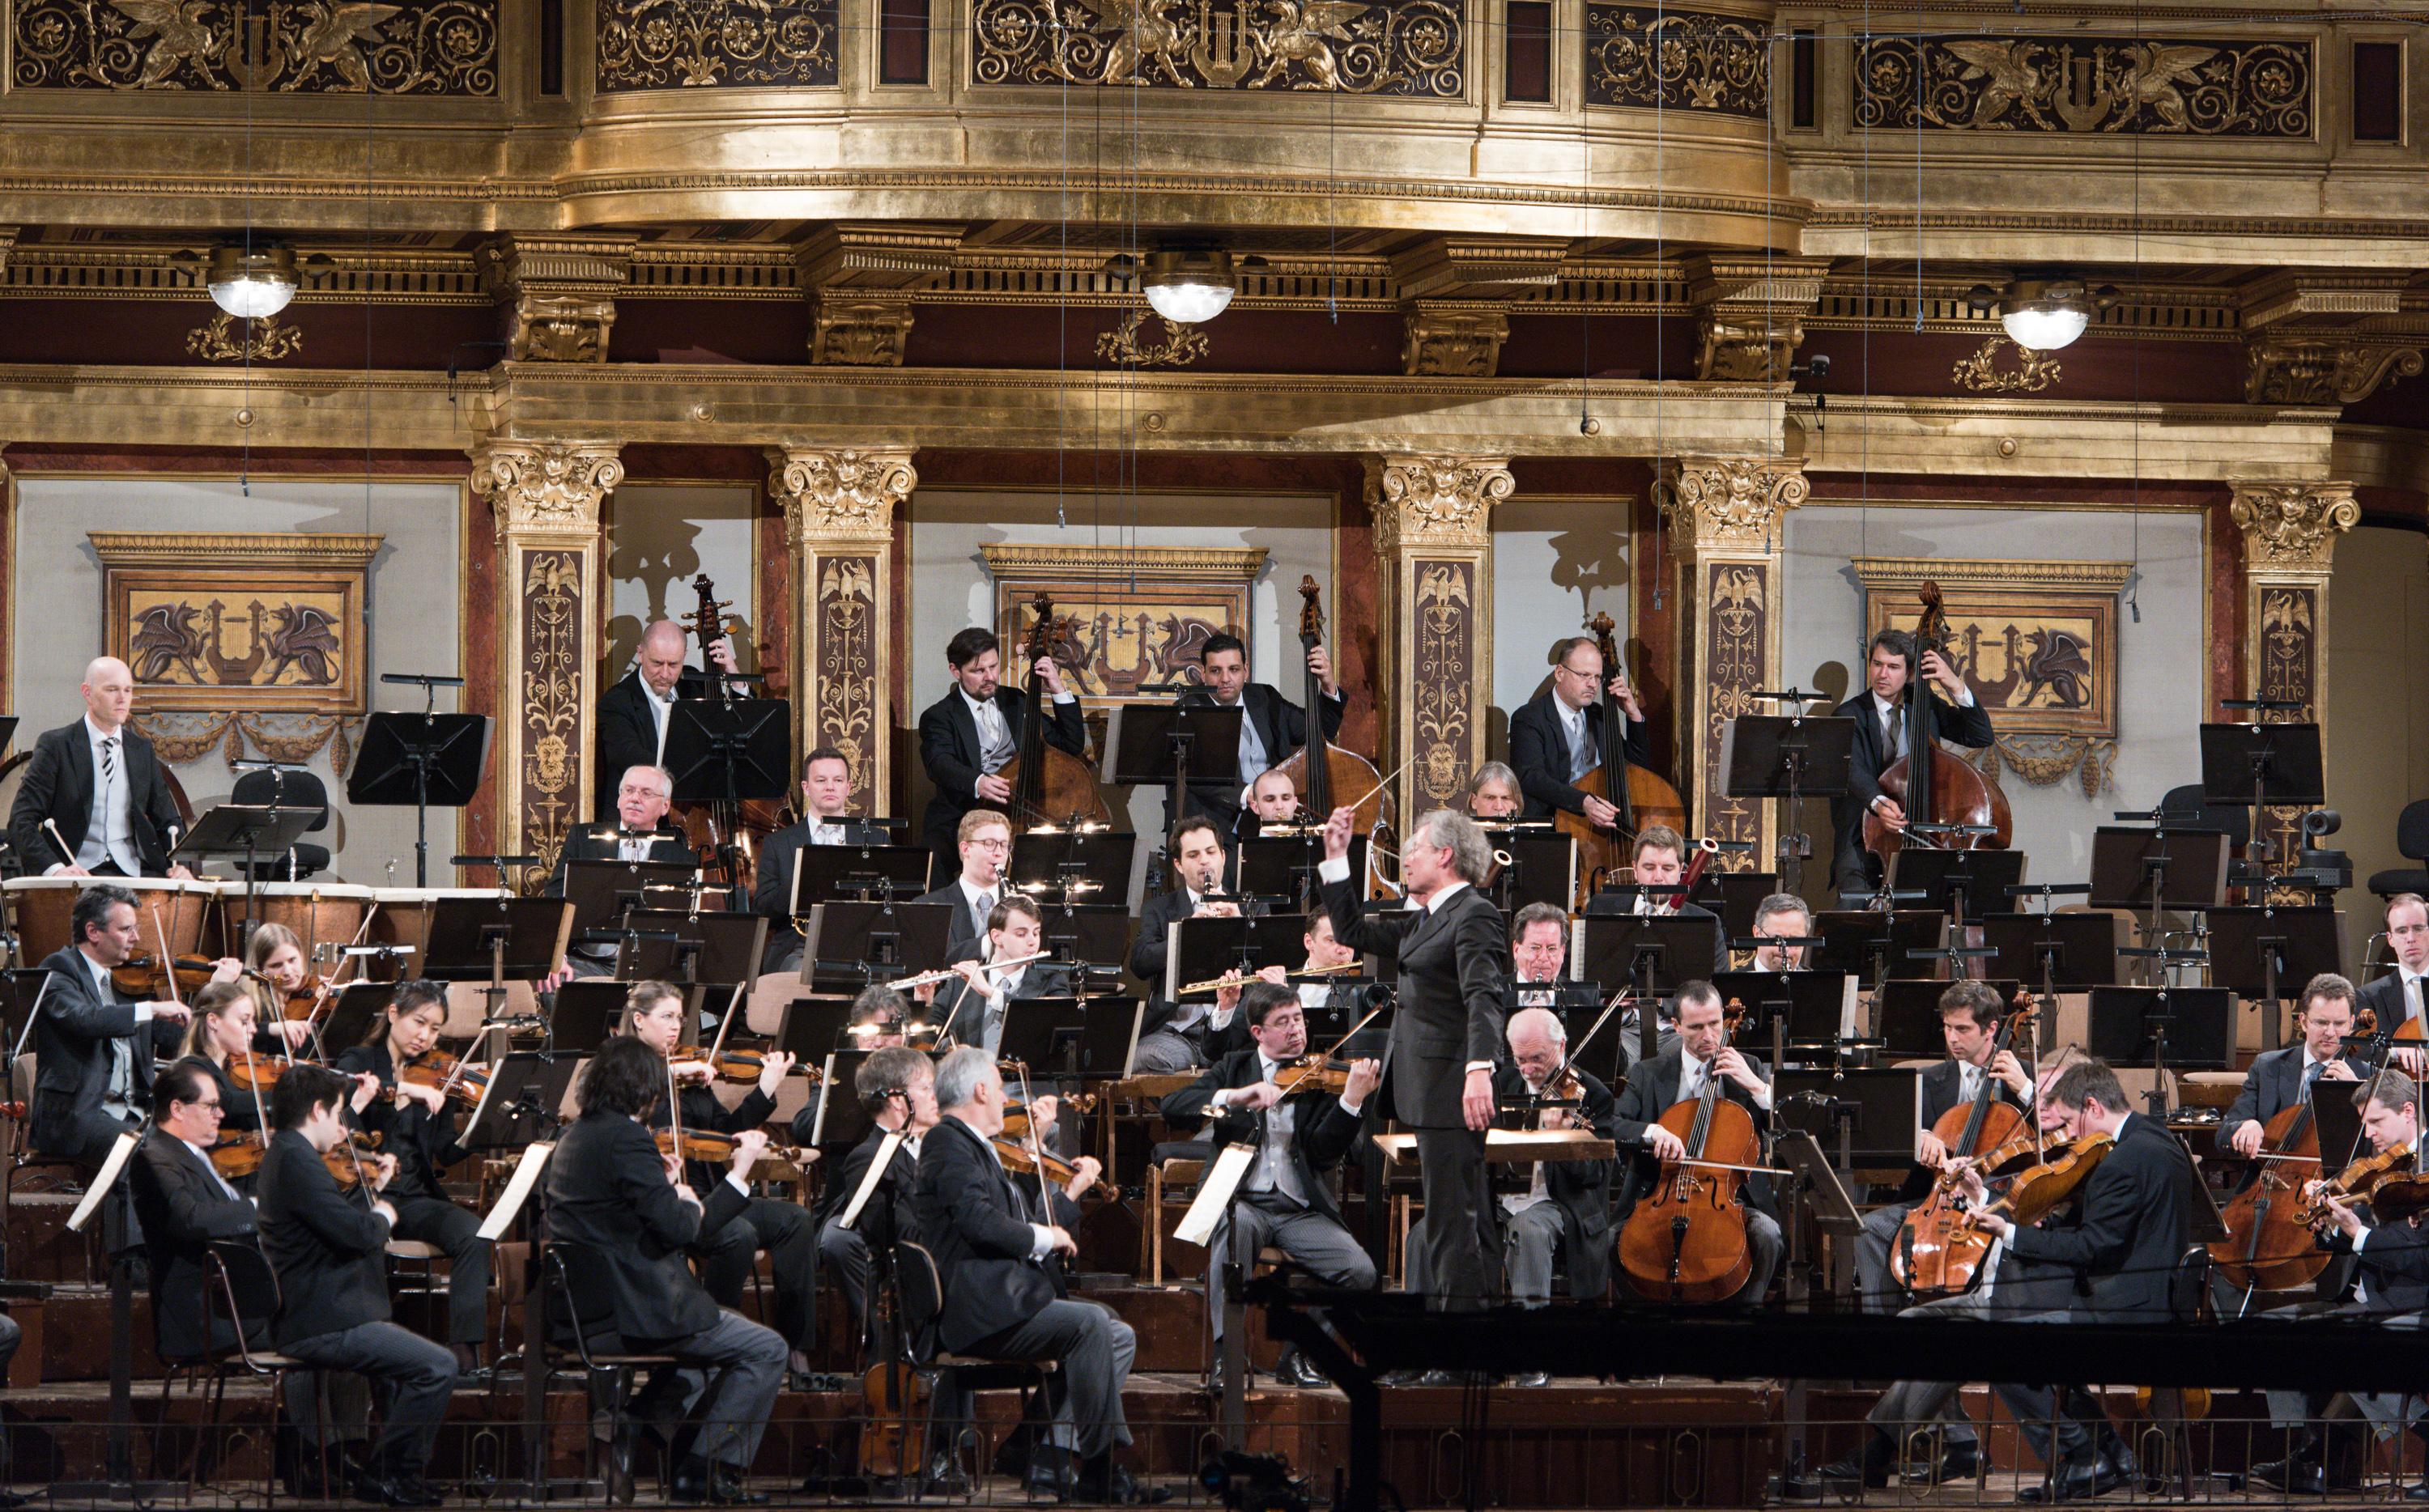 Concert tickets to go on sale October 10 for Vienna Philharmonic